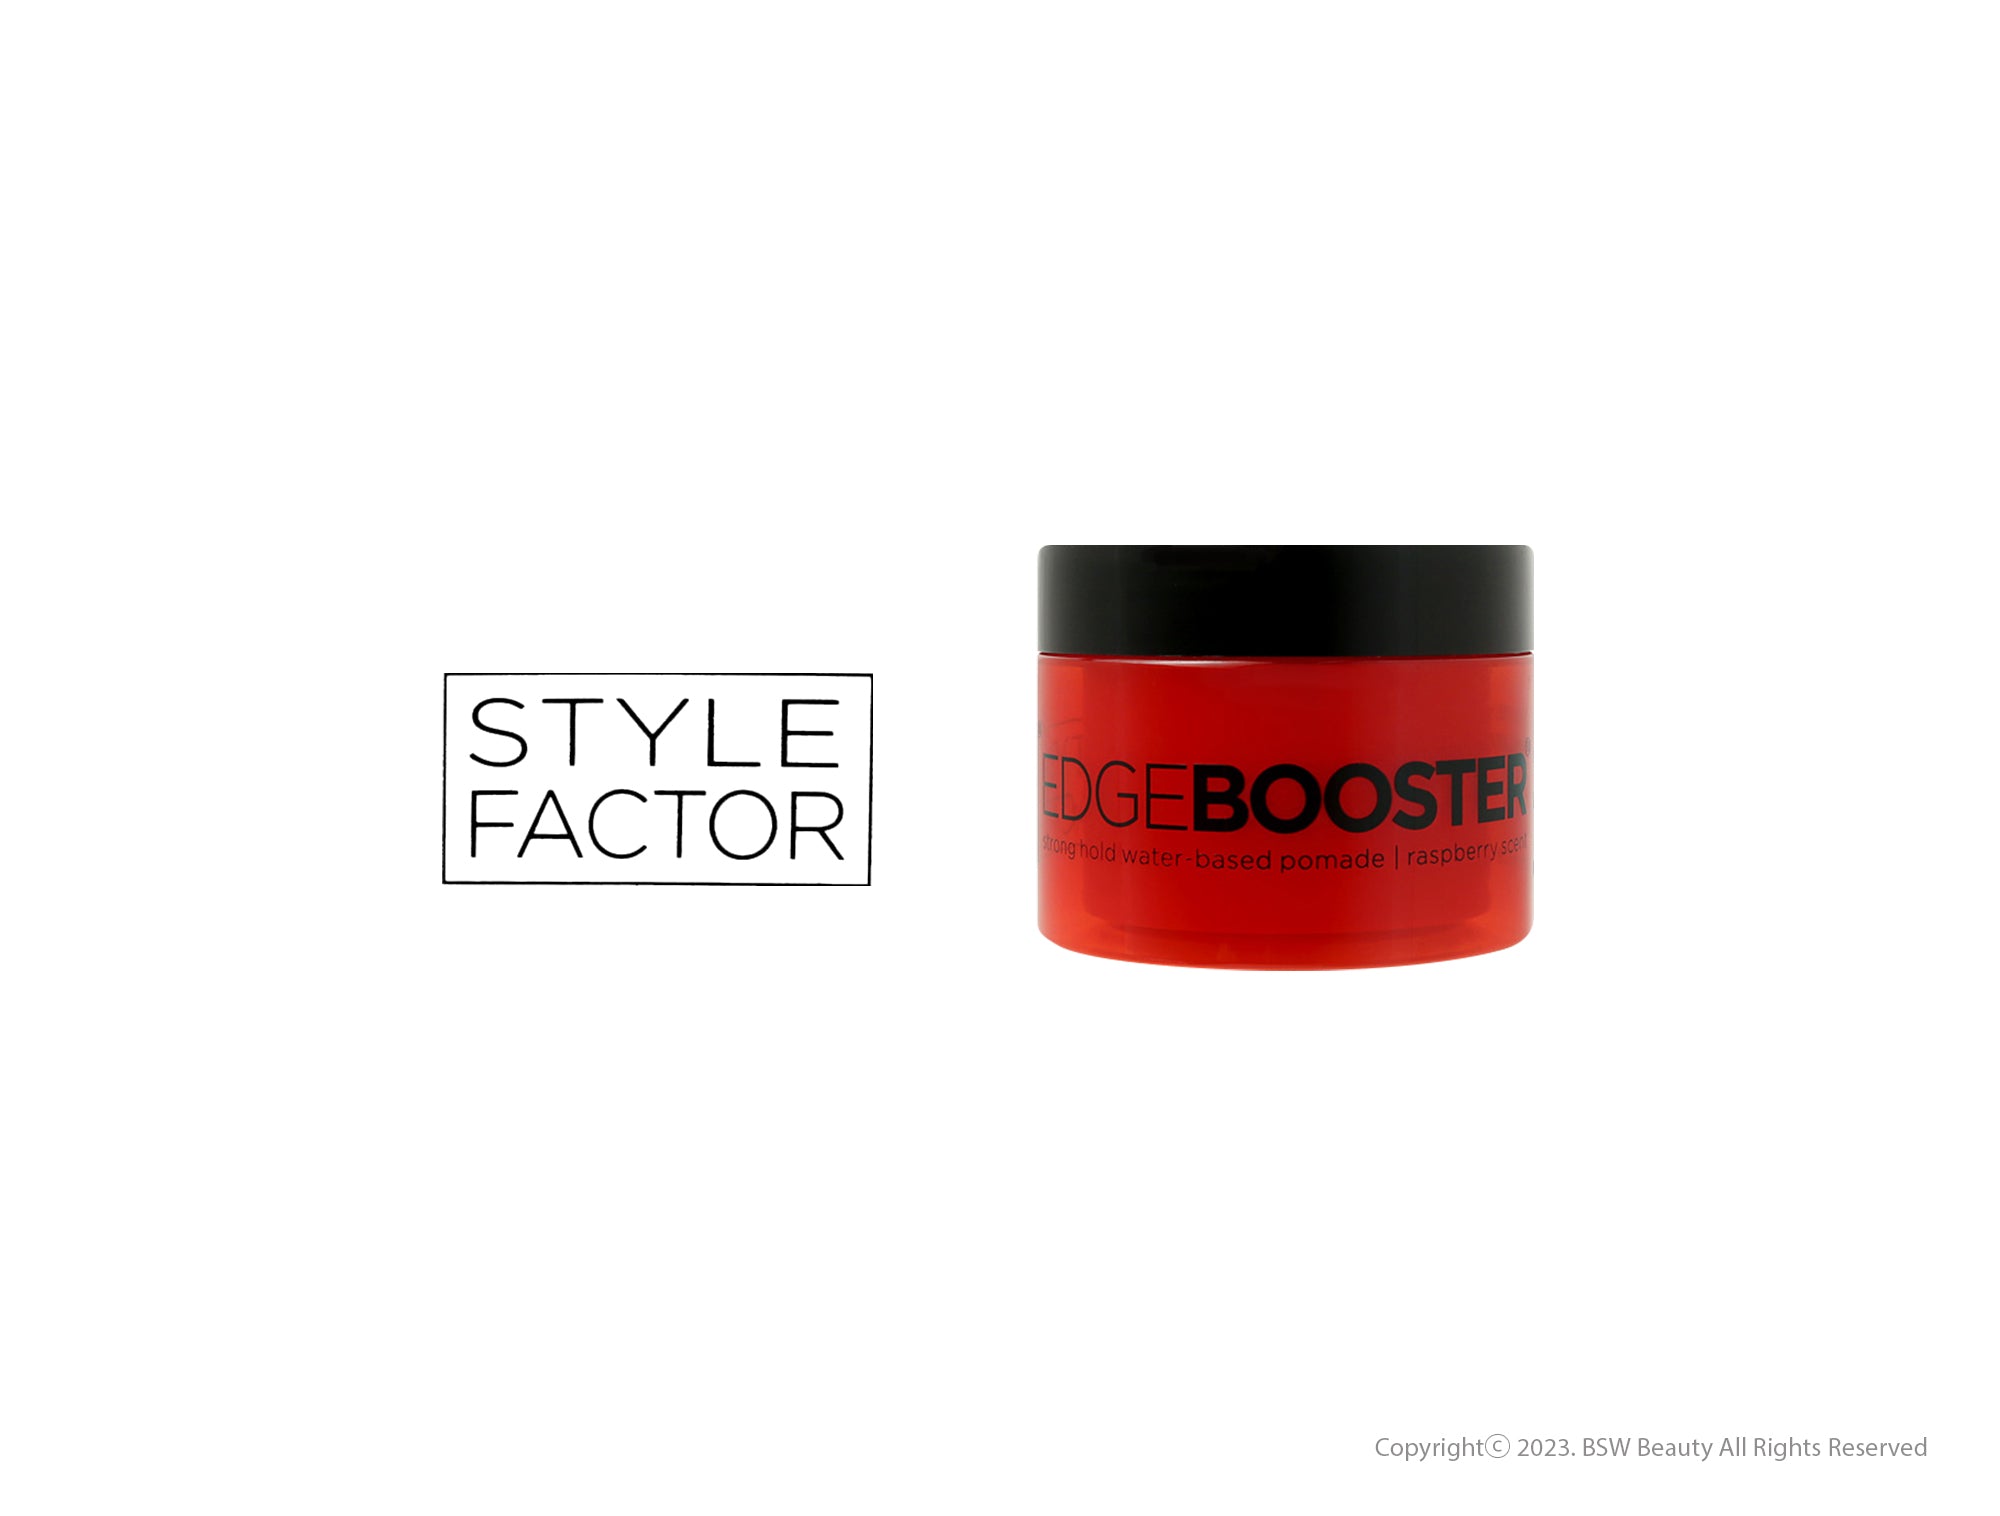 STYLE FACTOR EDGE BOOSTER STRONG HOLD WATER-BASED POMADE 3.38oz - 4 TYPES